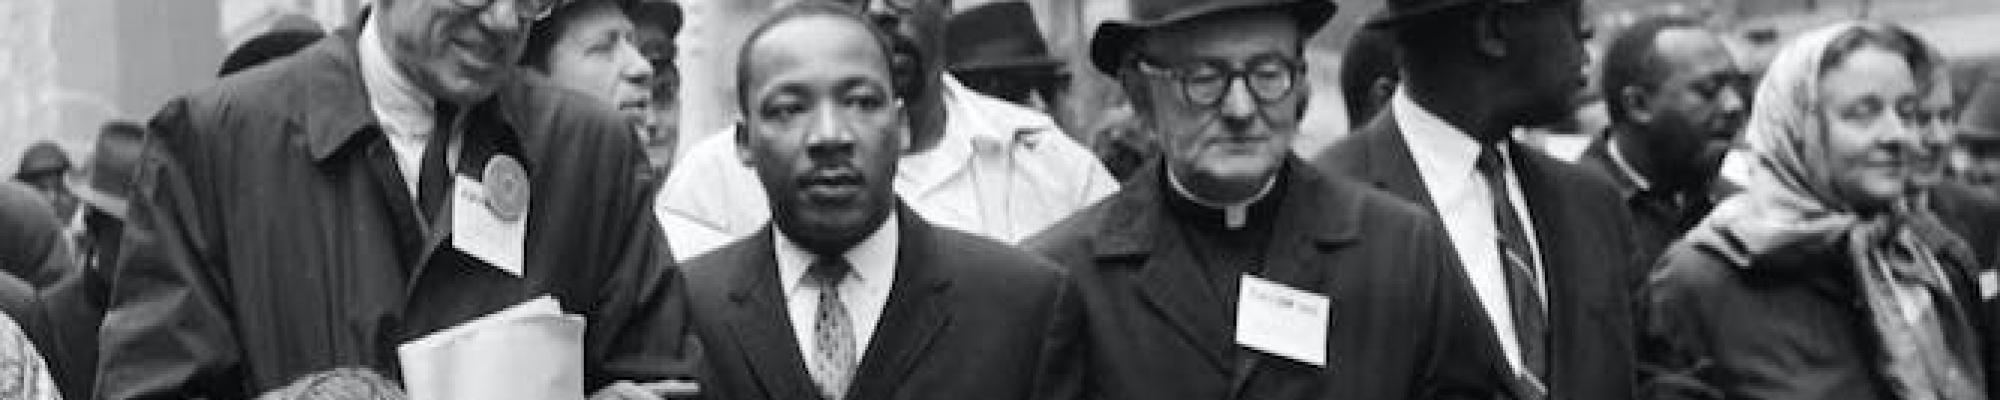 Martin Luther King and friend